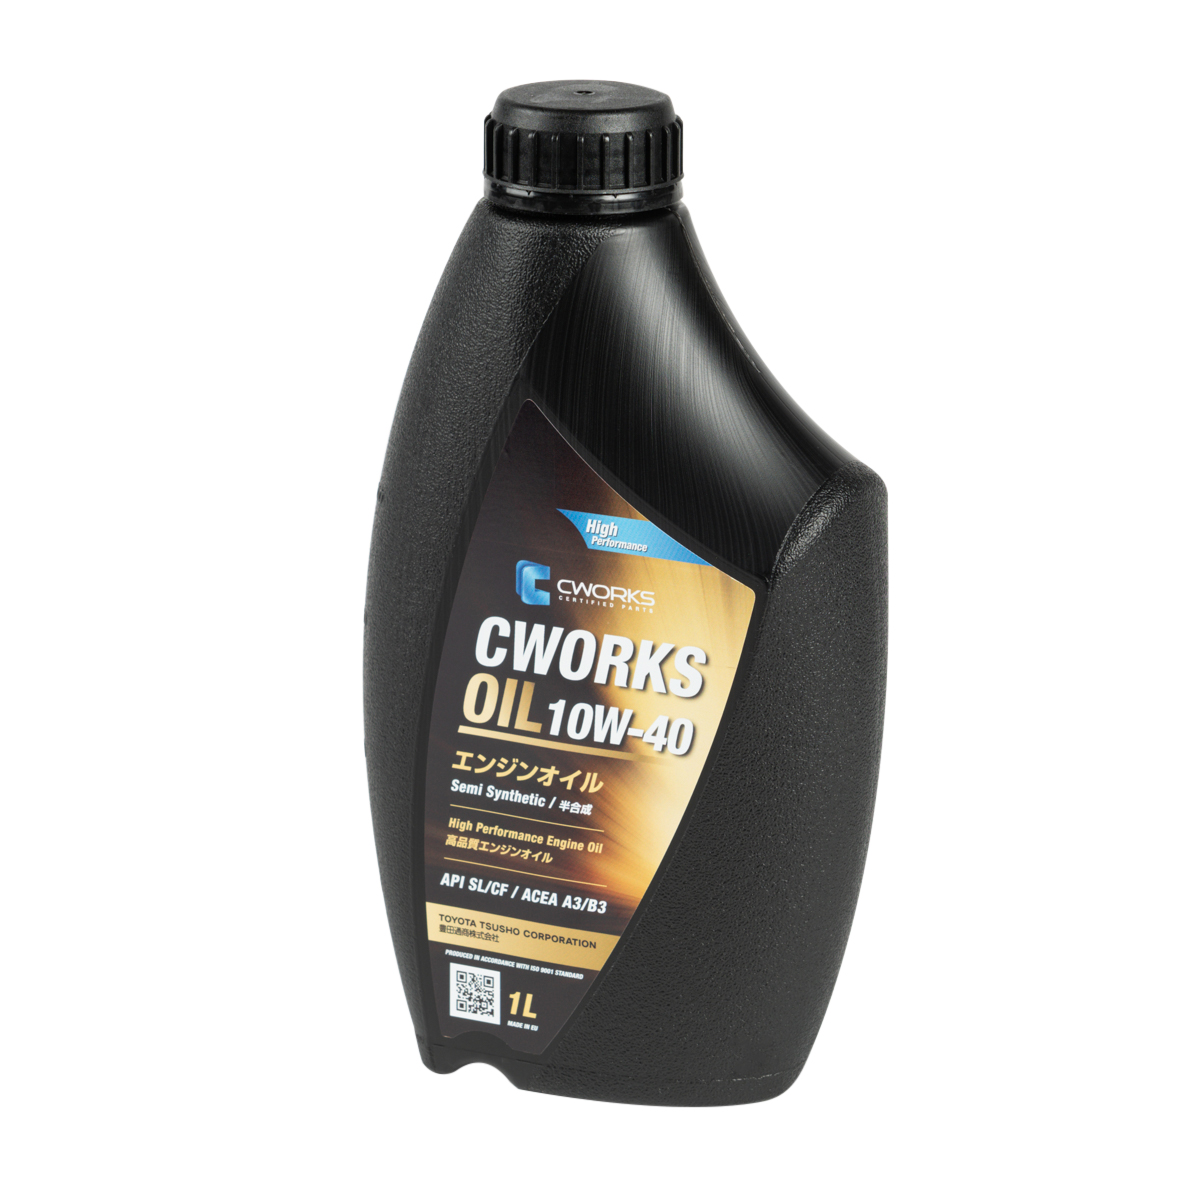 OIL 10w-40 a3/b3, 1L Масло моторное - CWORKS A130R4001